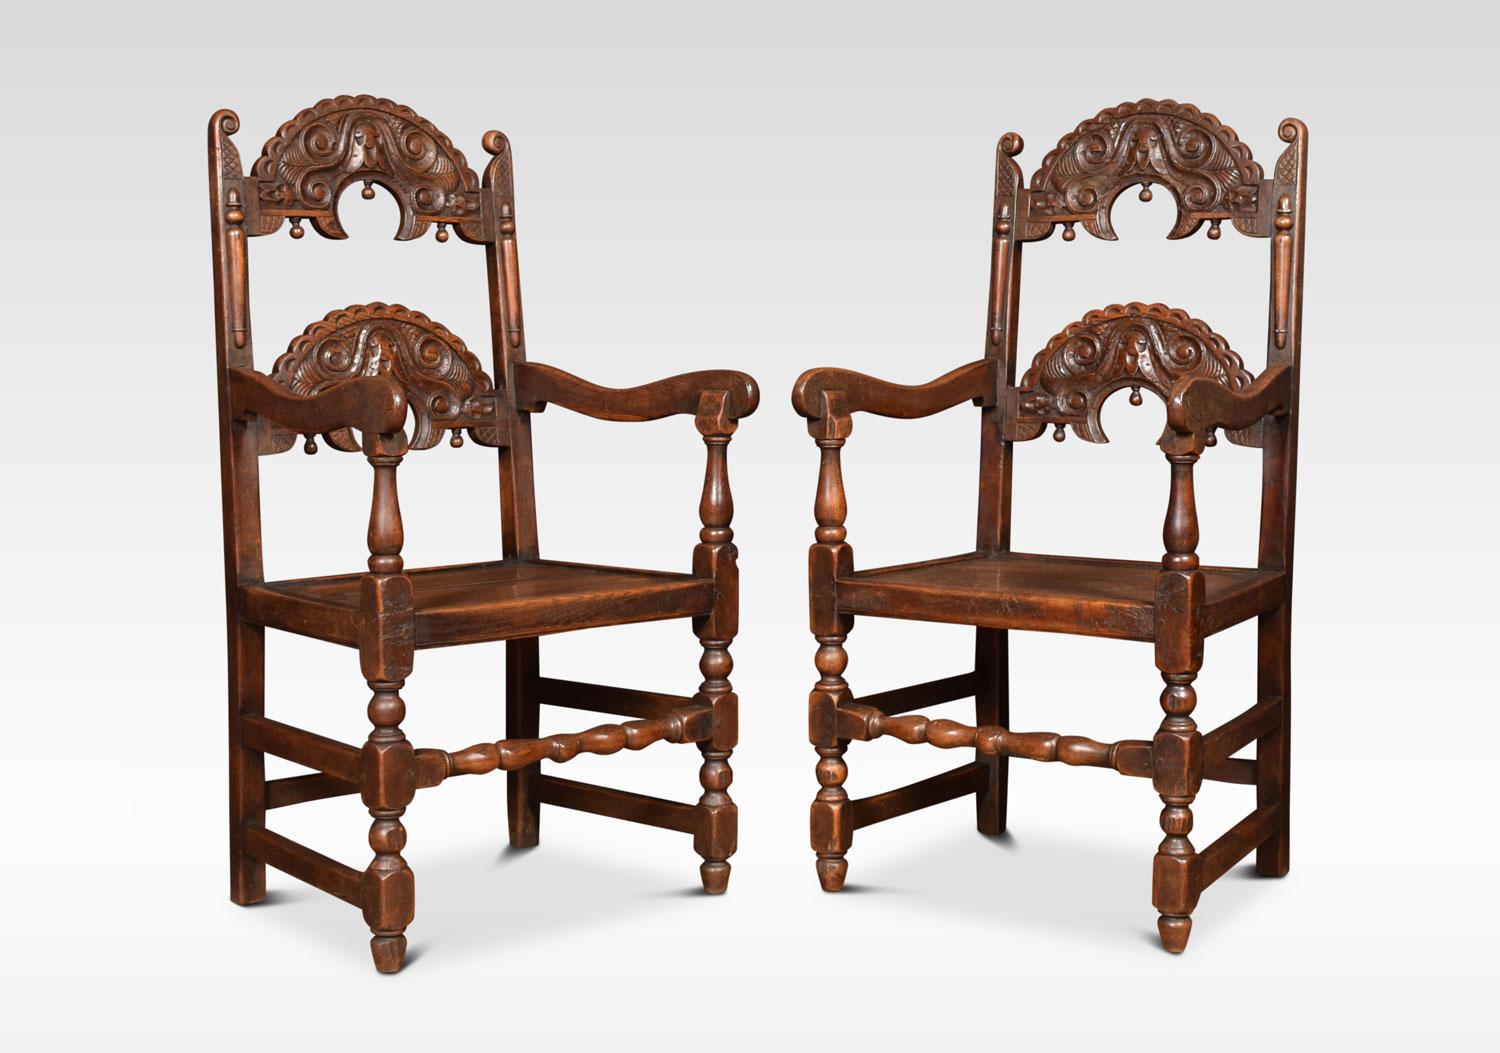 Comprising off a set of six chairs and two similar armchairs. Having arched supports with acorn drop finials above solid oak seats. All raised up on turned supports united by stretchers.
Dimensions:
Armchairs
Height 45 inches height to seat 18